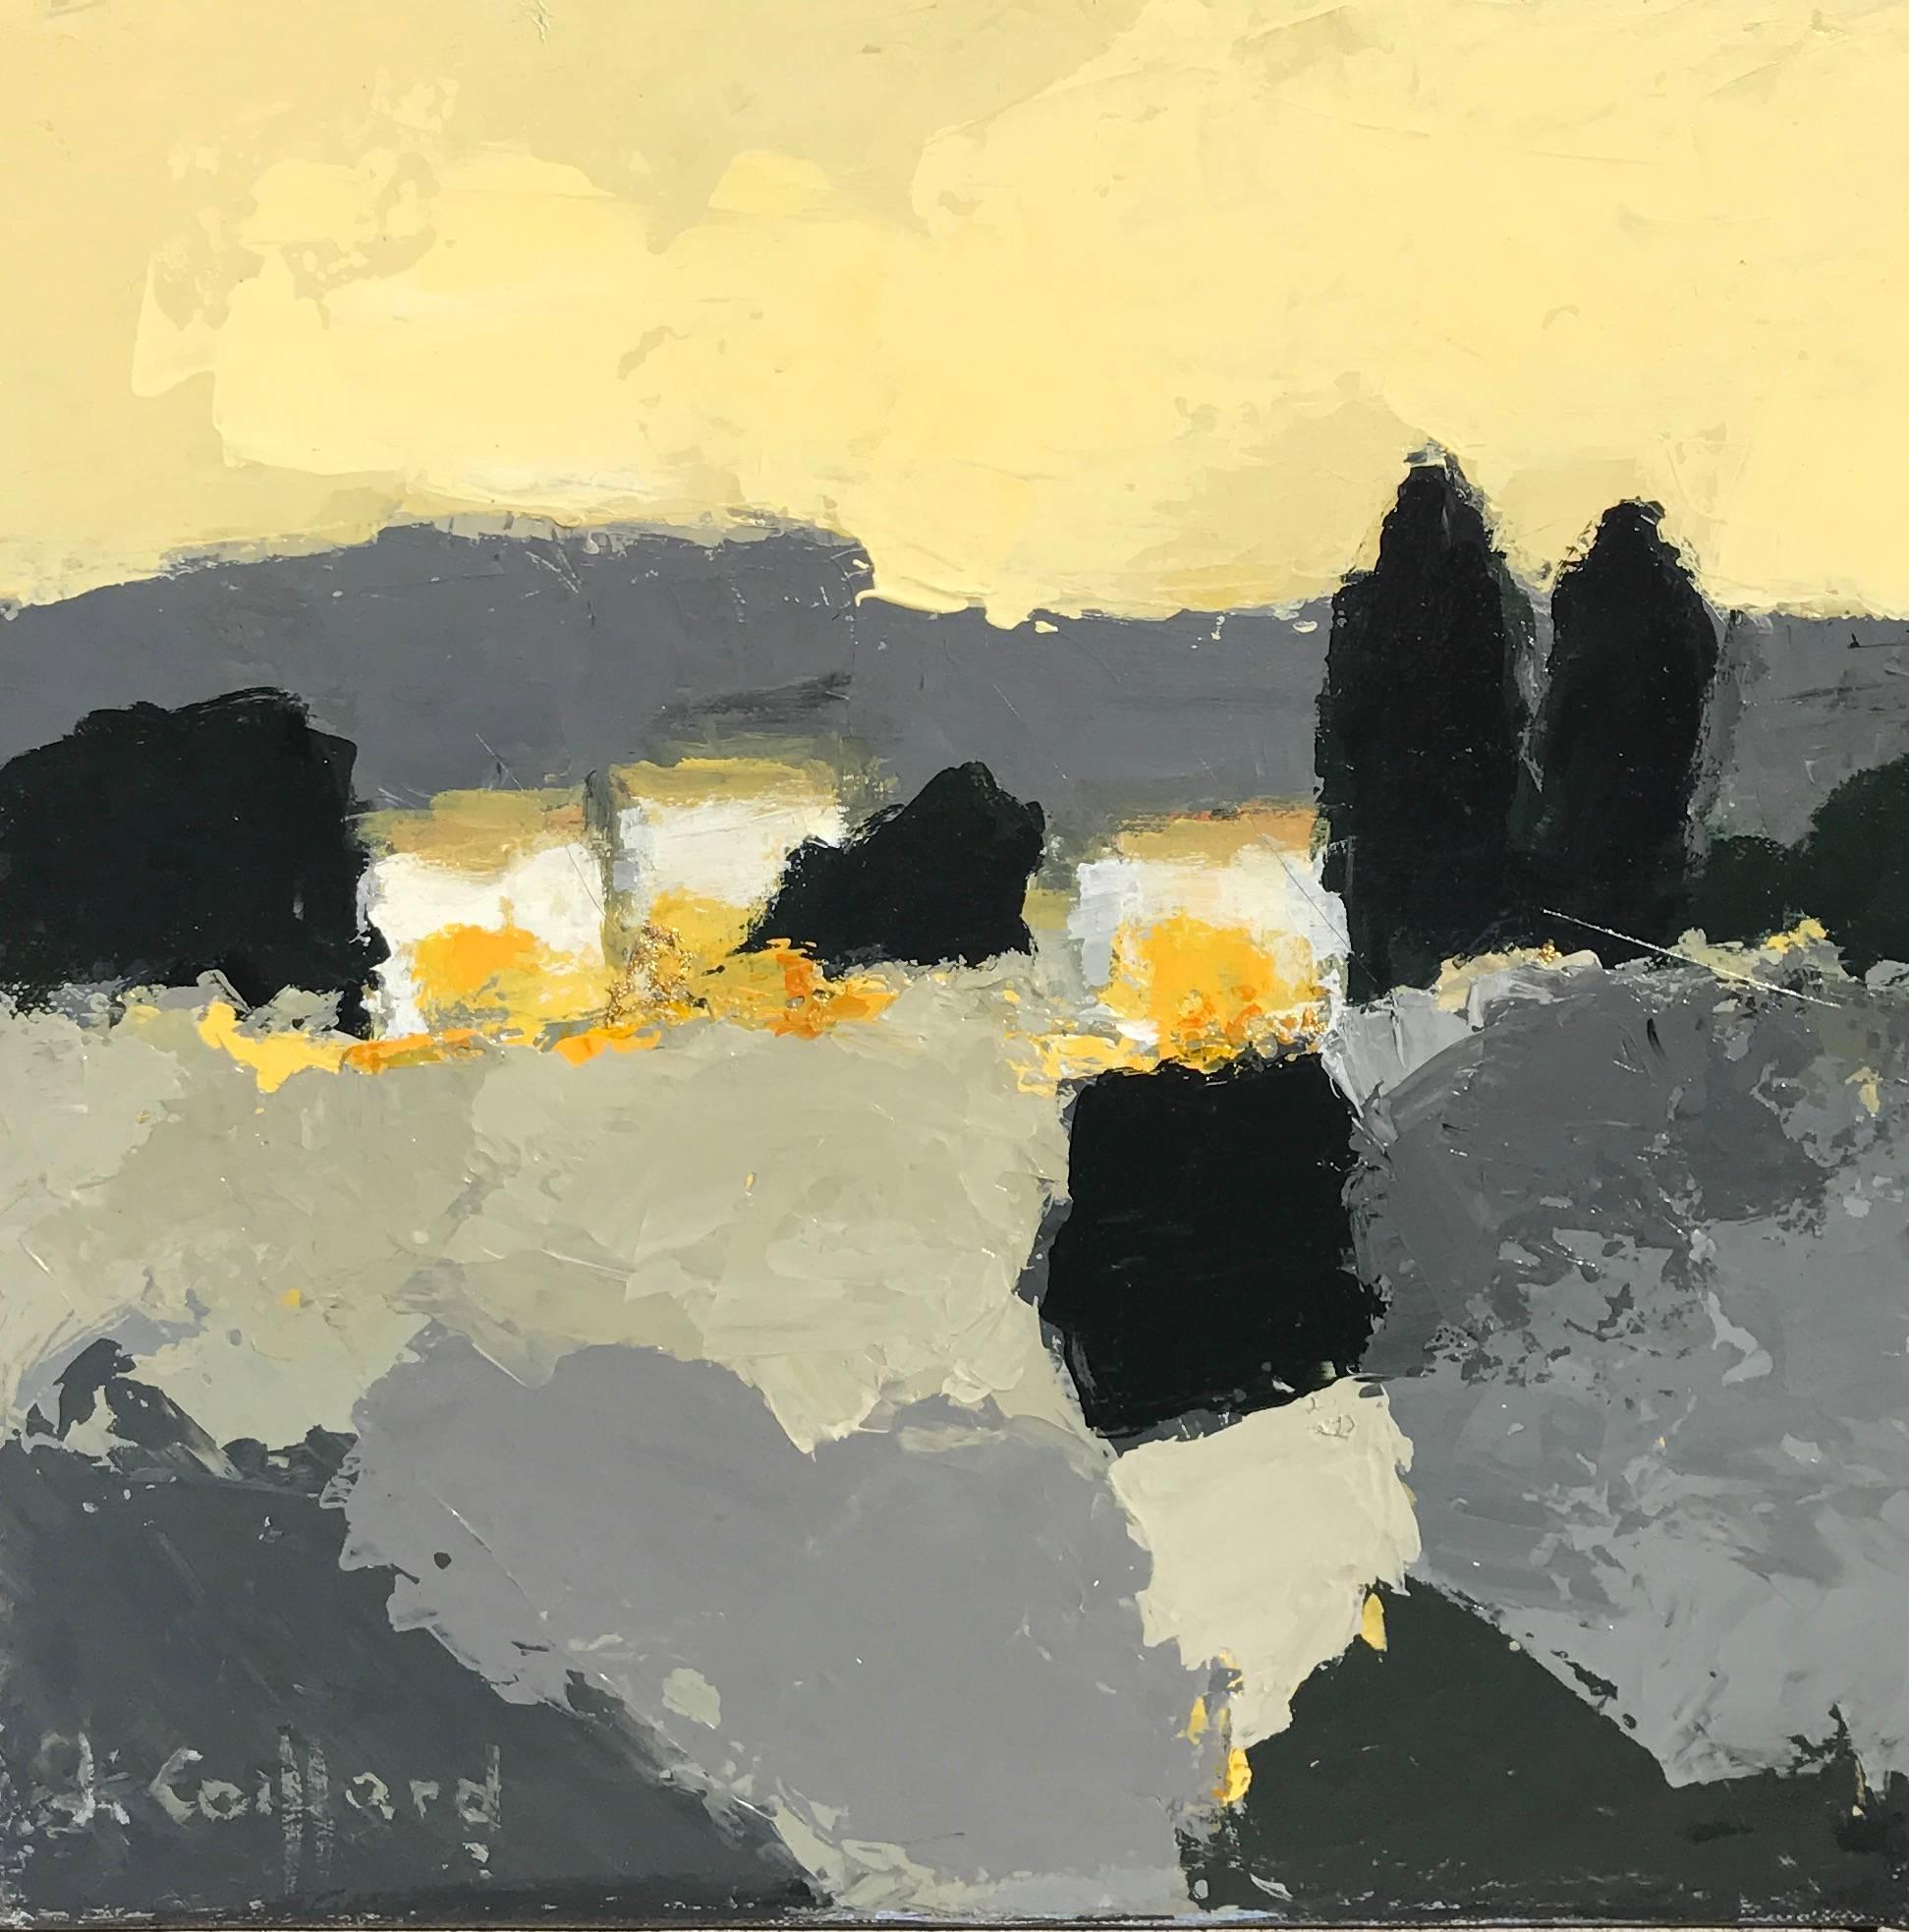 This abstract landscape painting of the French Countryside by French artist Lyliane Coiffard is titled "Le Luberon Nuageux" and was created in 2016. It is an oil on canvas of small size with an edgy palette made of blue, grey, yellow and white. On